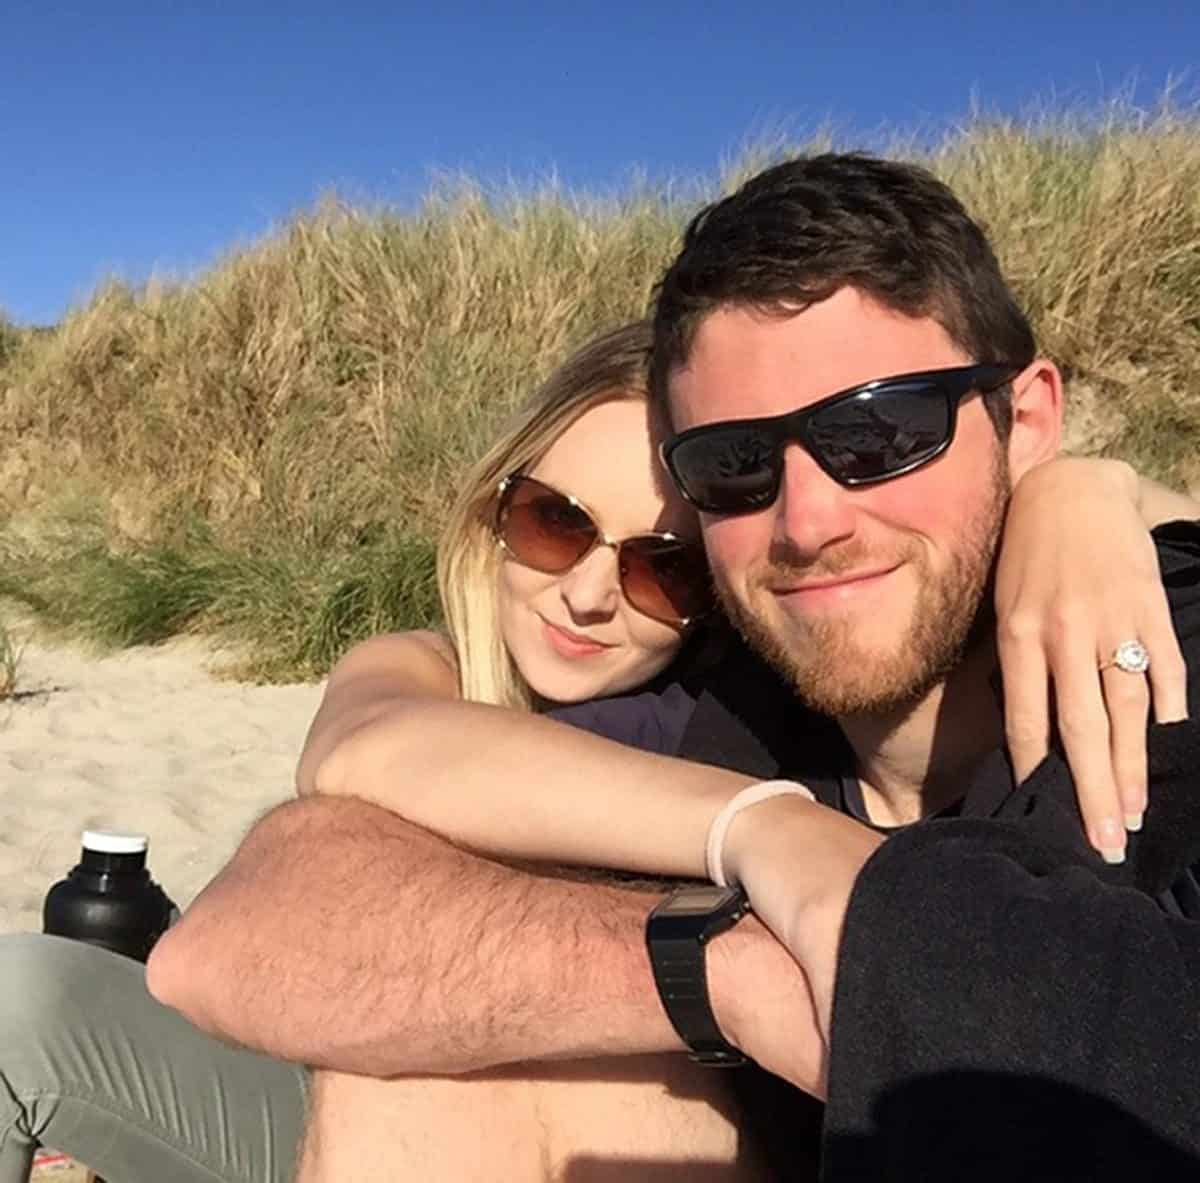 Handout photo issued by Thames Valley Police of 28-year-old Pc Andrew Harper and his wife, Lissie. Harper's wife Lissie has released a tribute to him, calling him "the kindest, loveliest, most selfless person" and adding: "My darling boy I do not know how I will be able to survive without you." PC Harper died after being dragged under the wheels of a vehicle while responding to reports of a burglary in the Berkshire village of Bradfield, Southend, at 11.30pm on August 15.